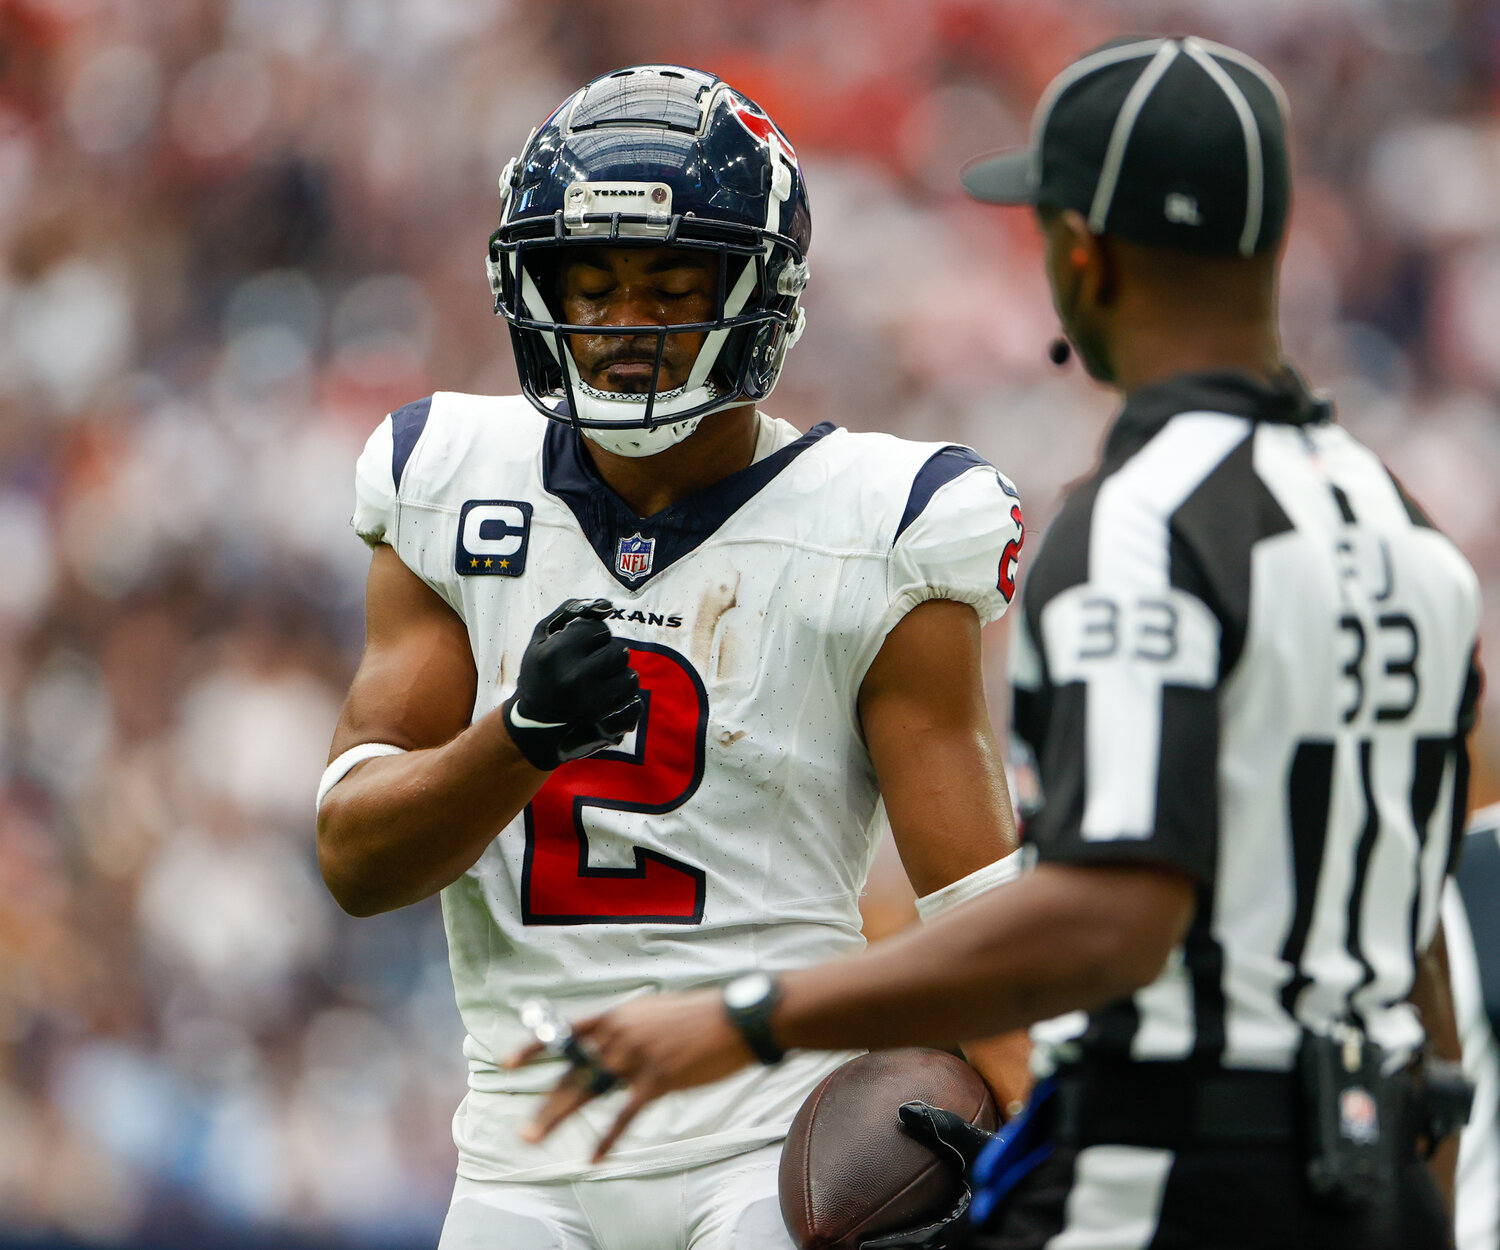 Texans wide receiver Robert Woods (2) reacts after a catch during an NFL game between the Texans and the Colts on September 17, 2023 in Houston. The Colts won, 31-20.